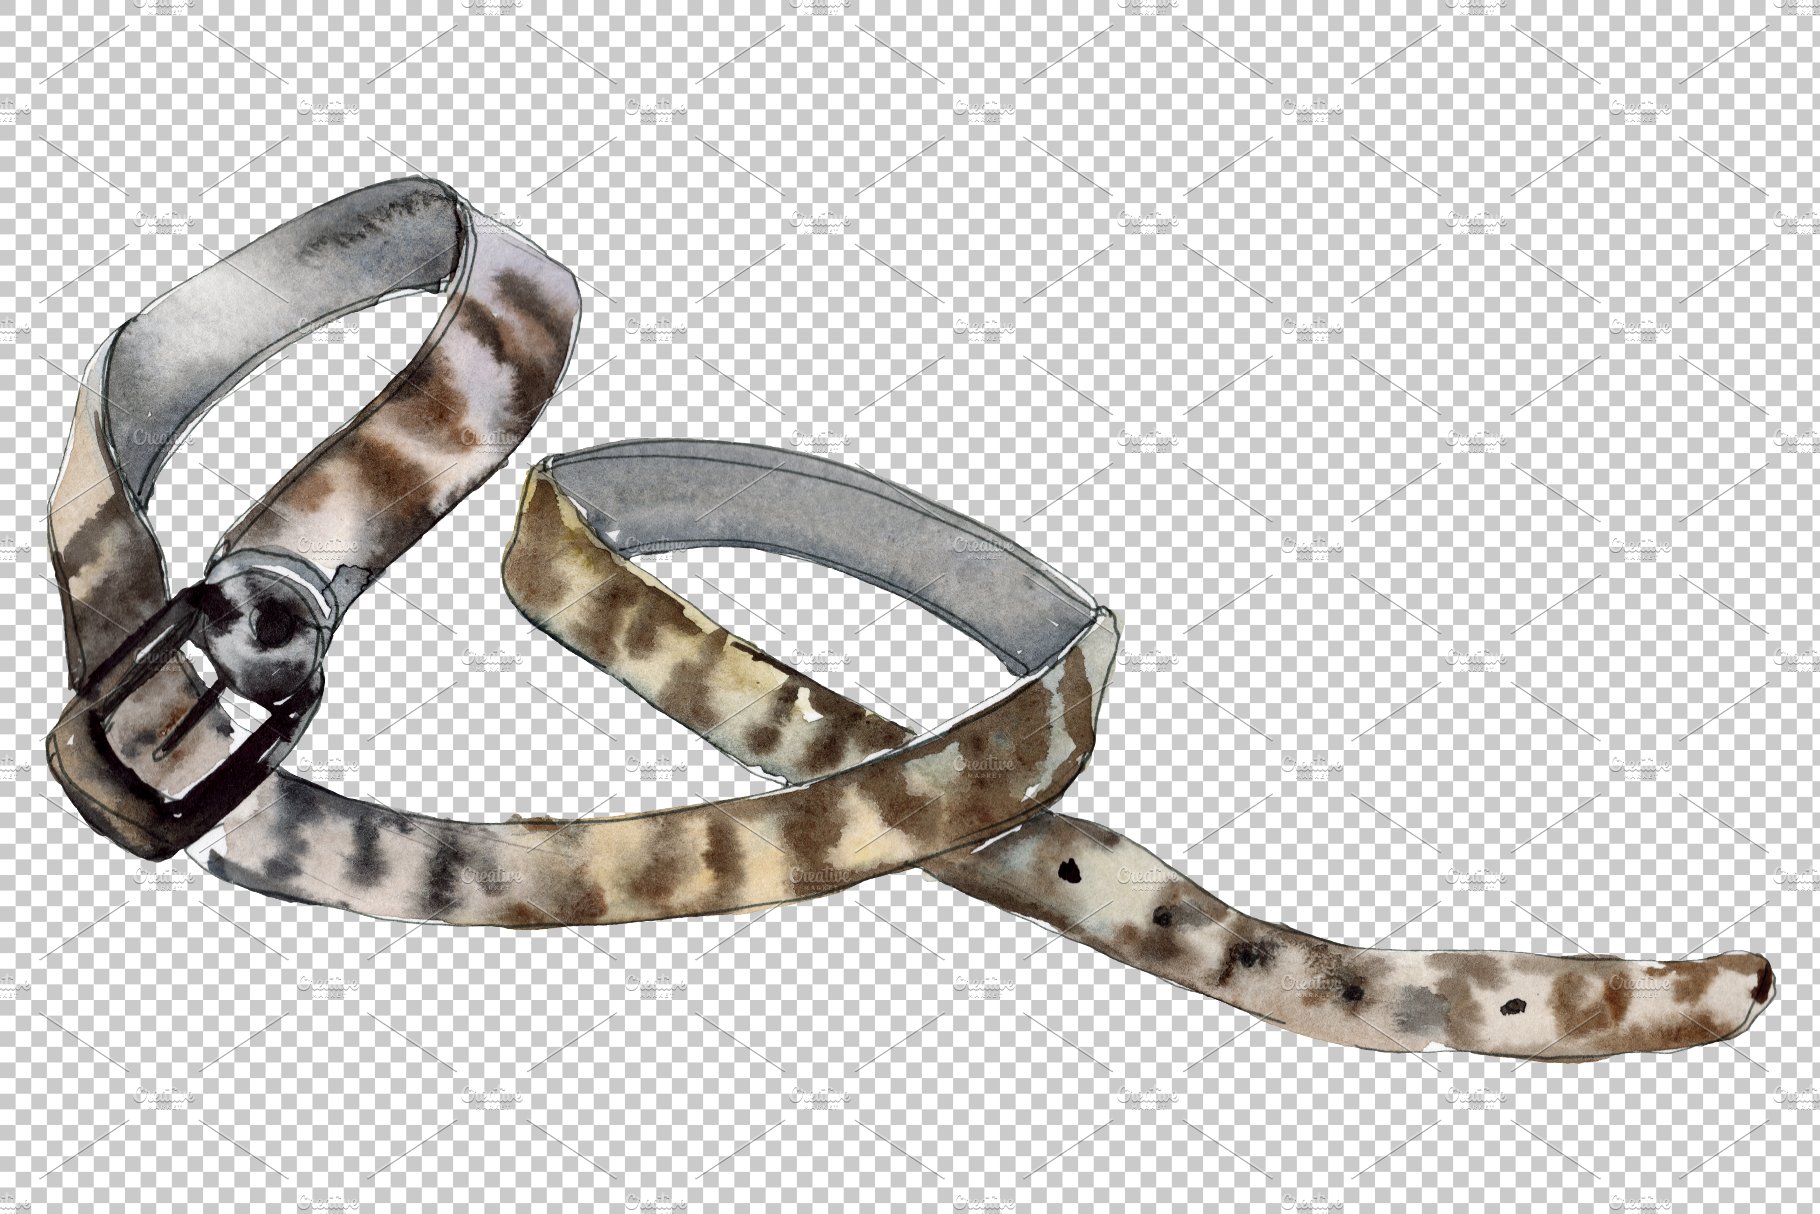 Chains, leather belts Watercolor png preview image.